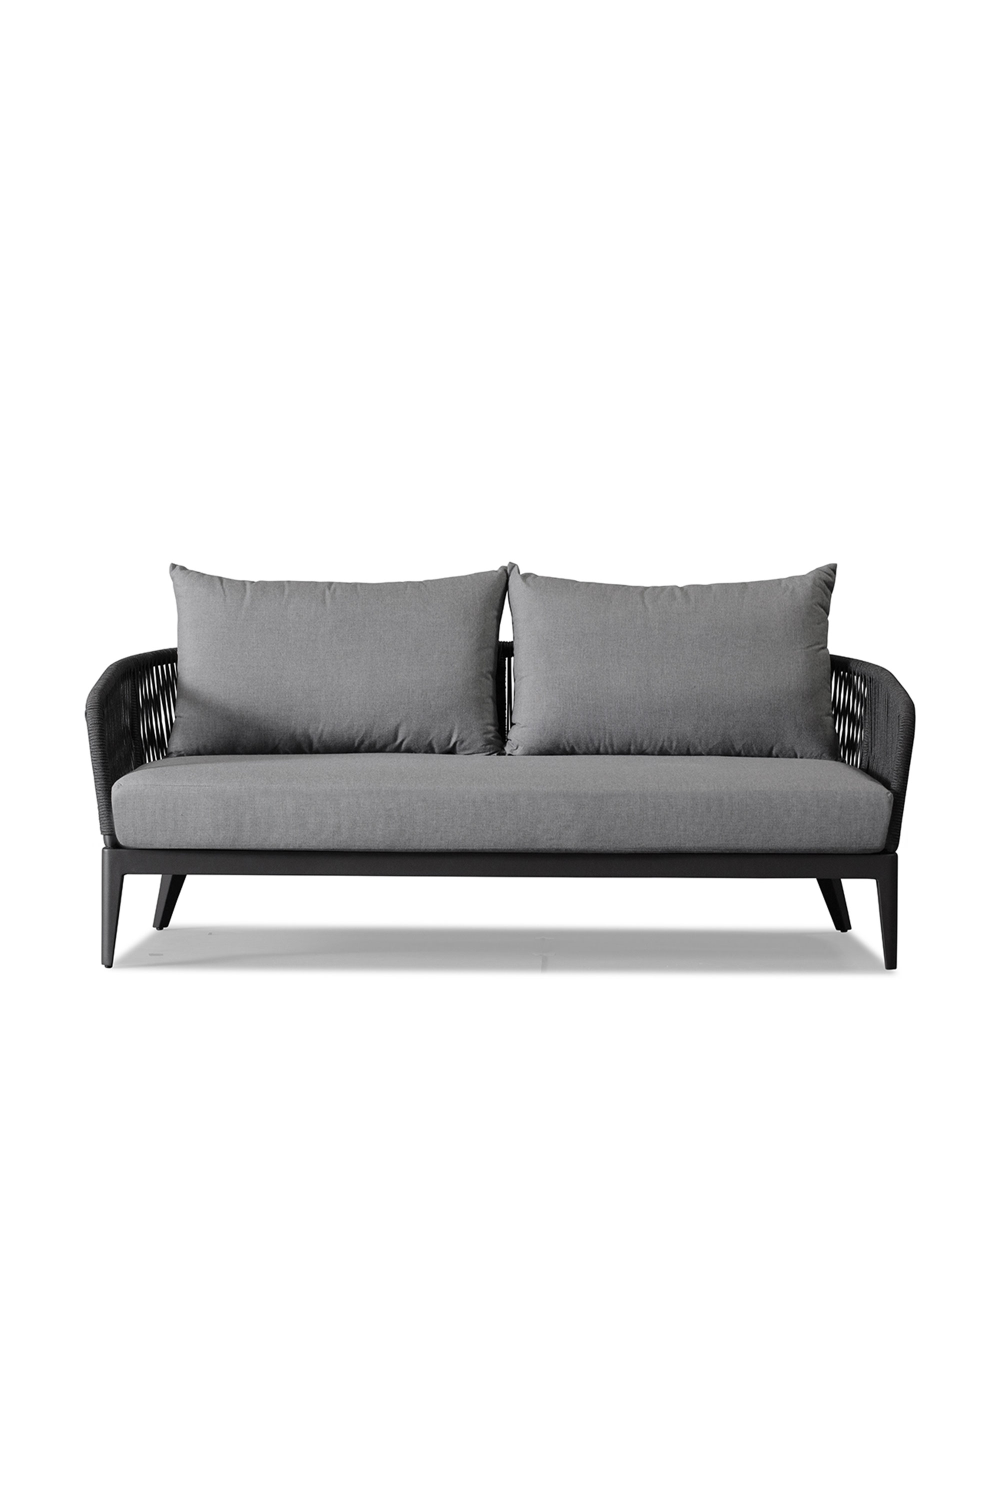 Curved Modern Outdoor Sofa | Andrew Martin Voyage | OROA